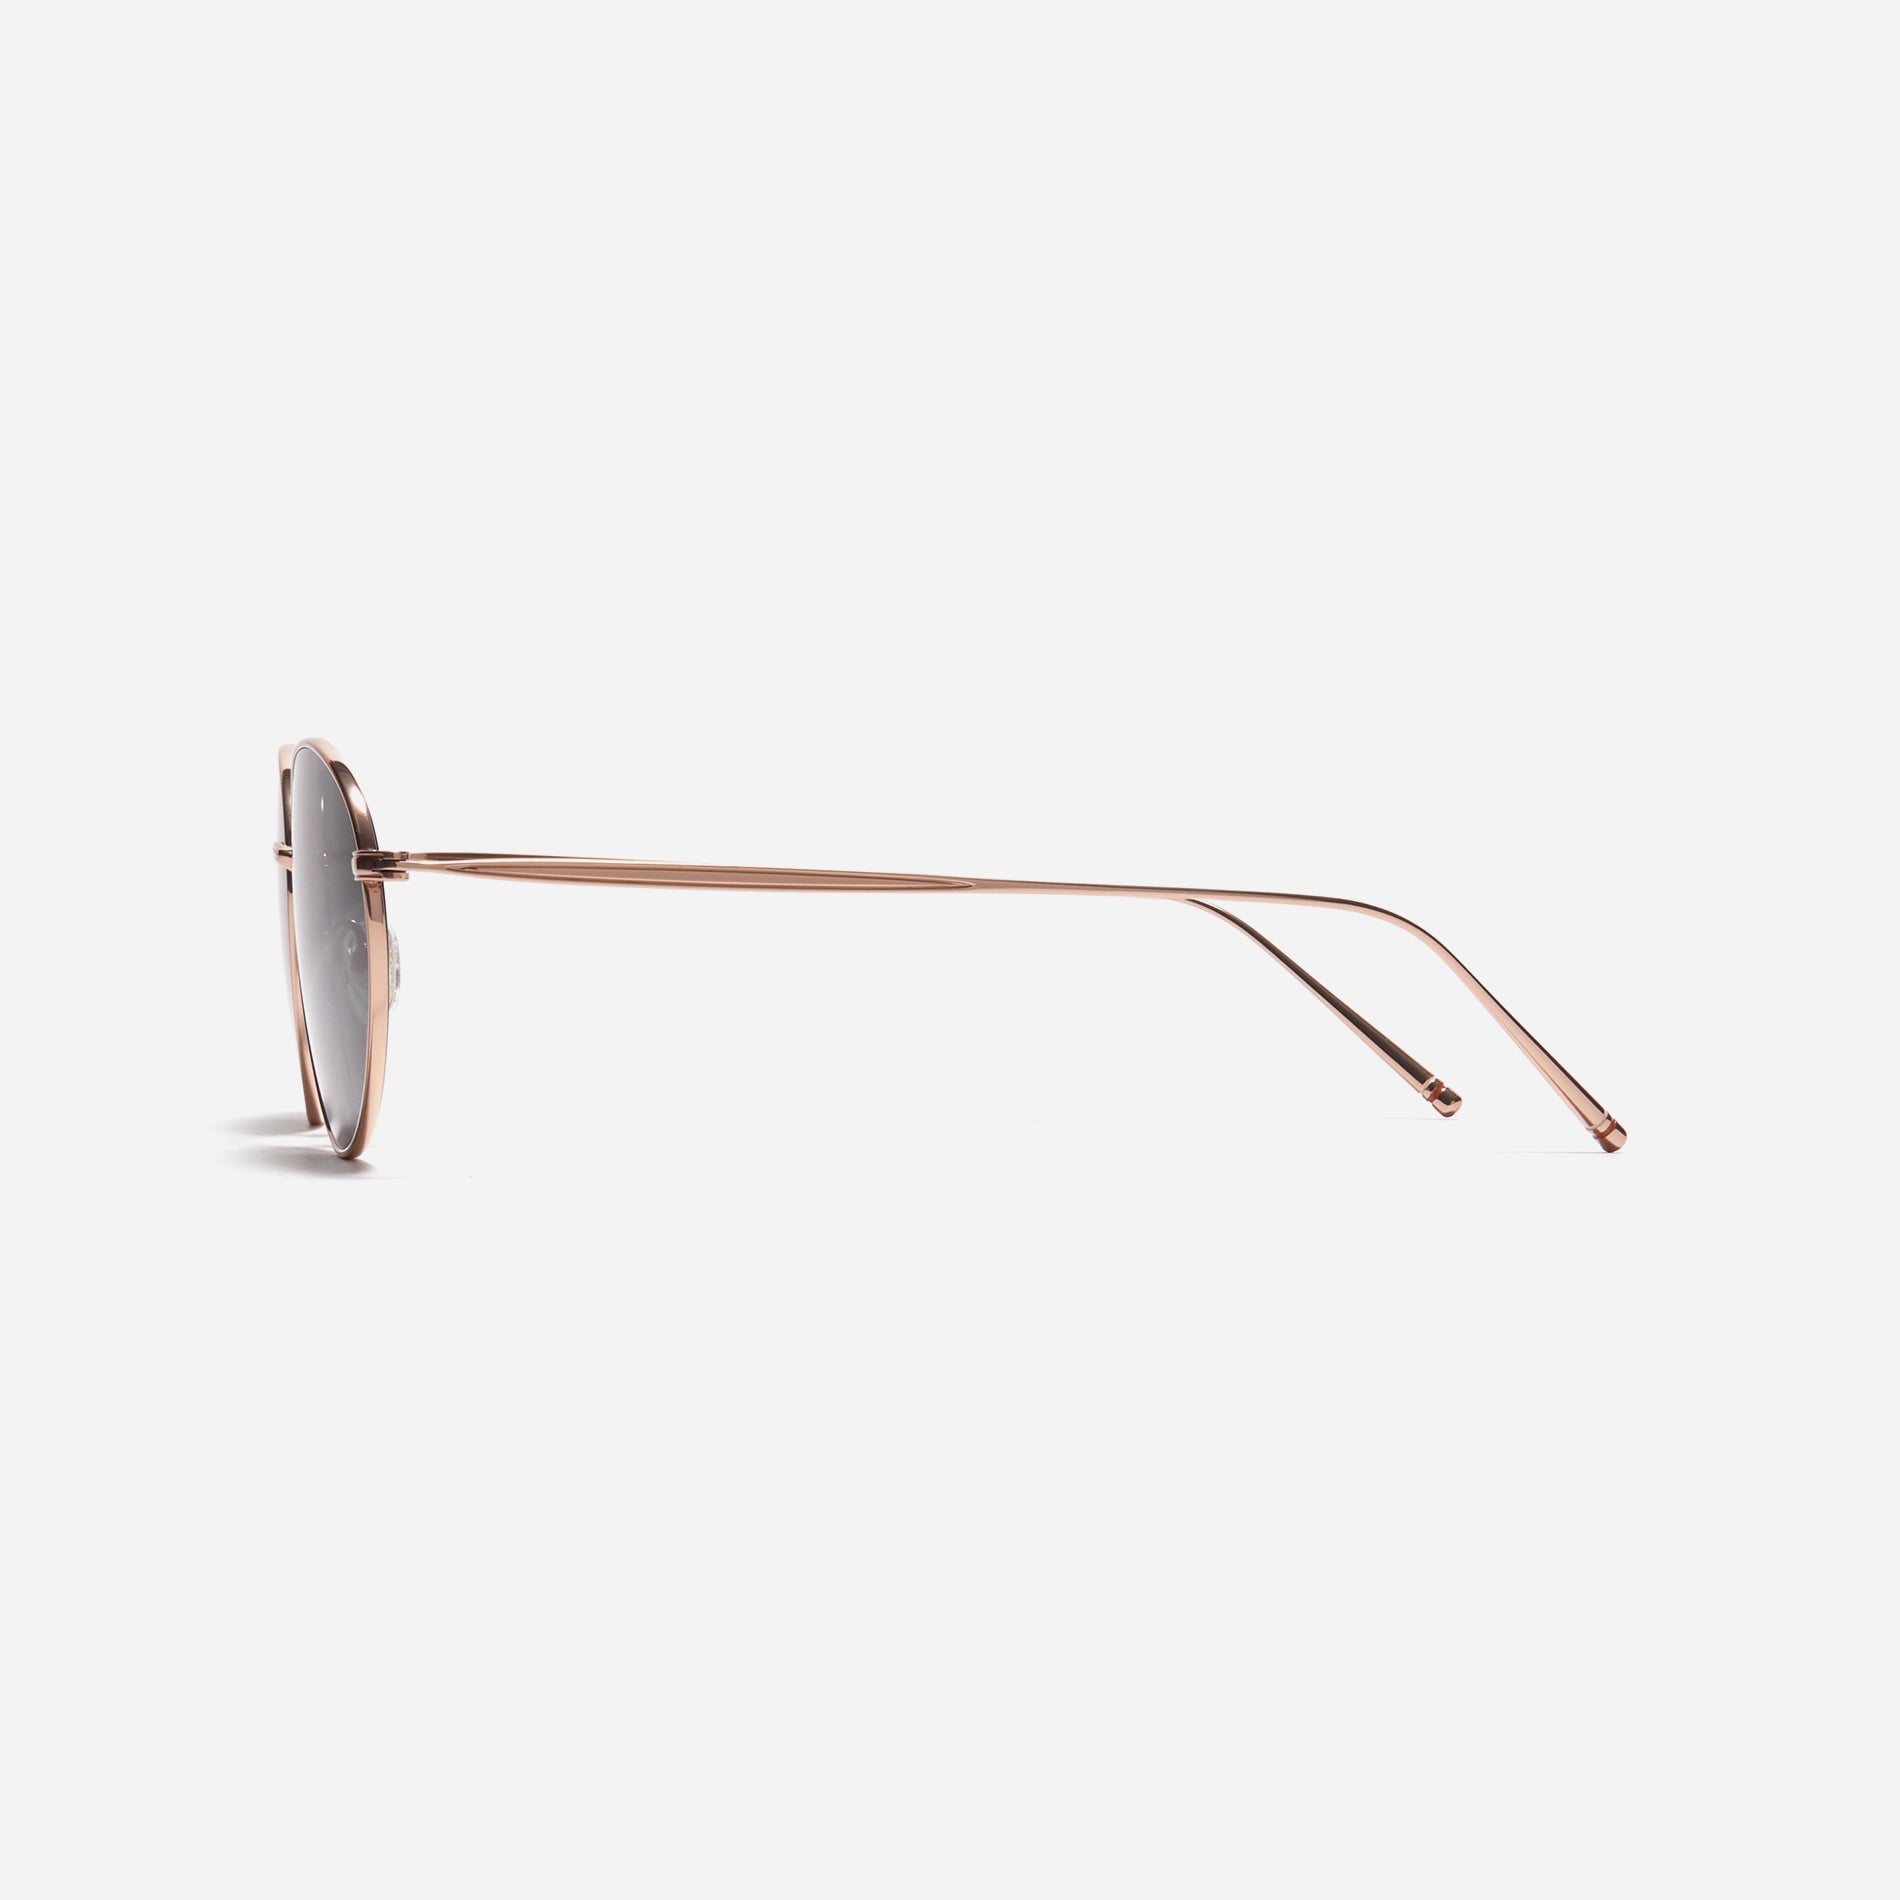 Idell sunglasses feature sleek metal frame with a narrow design. Crafted entirely from titanium, they guarantee a lightweight and comfortable fit. Available in color variations that naturally complement facial features, they provide a soft and versatile style for everyday wear.